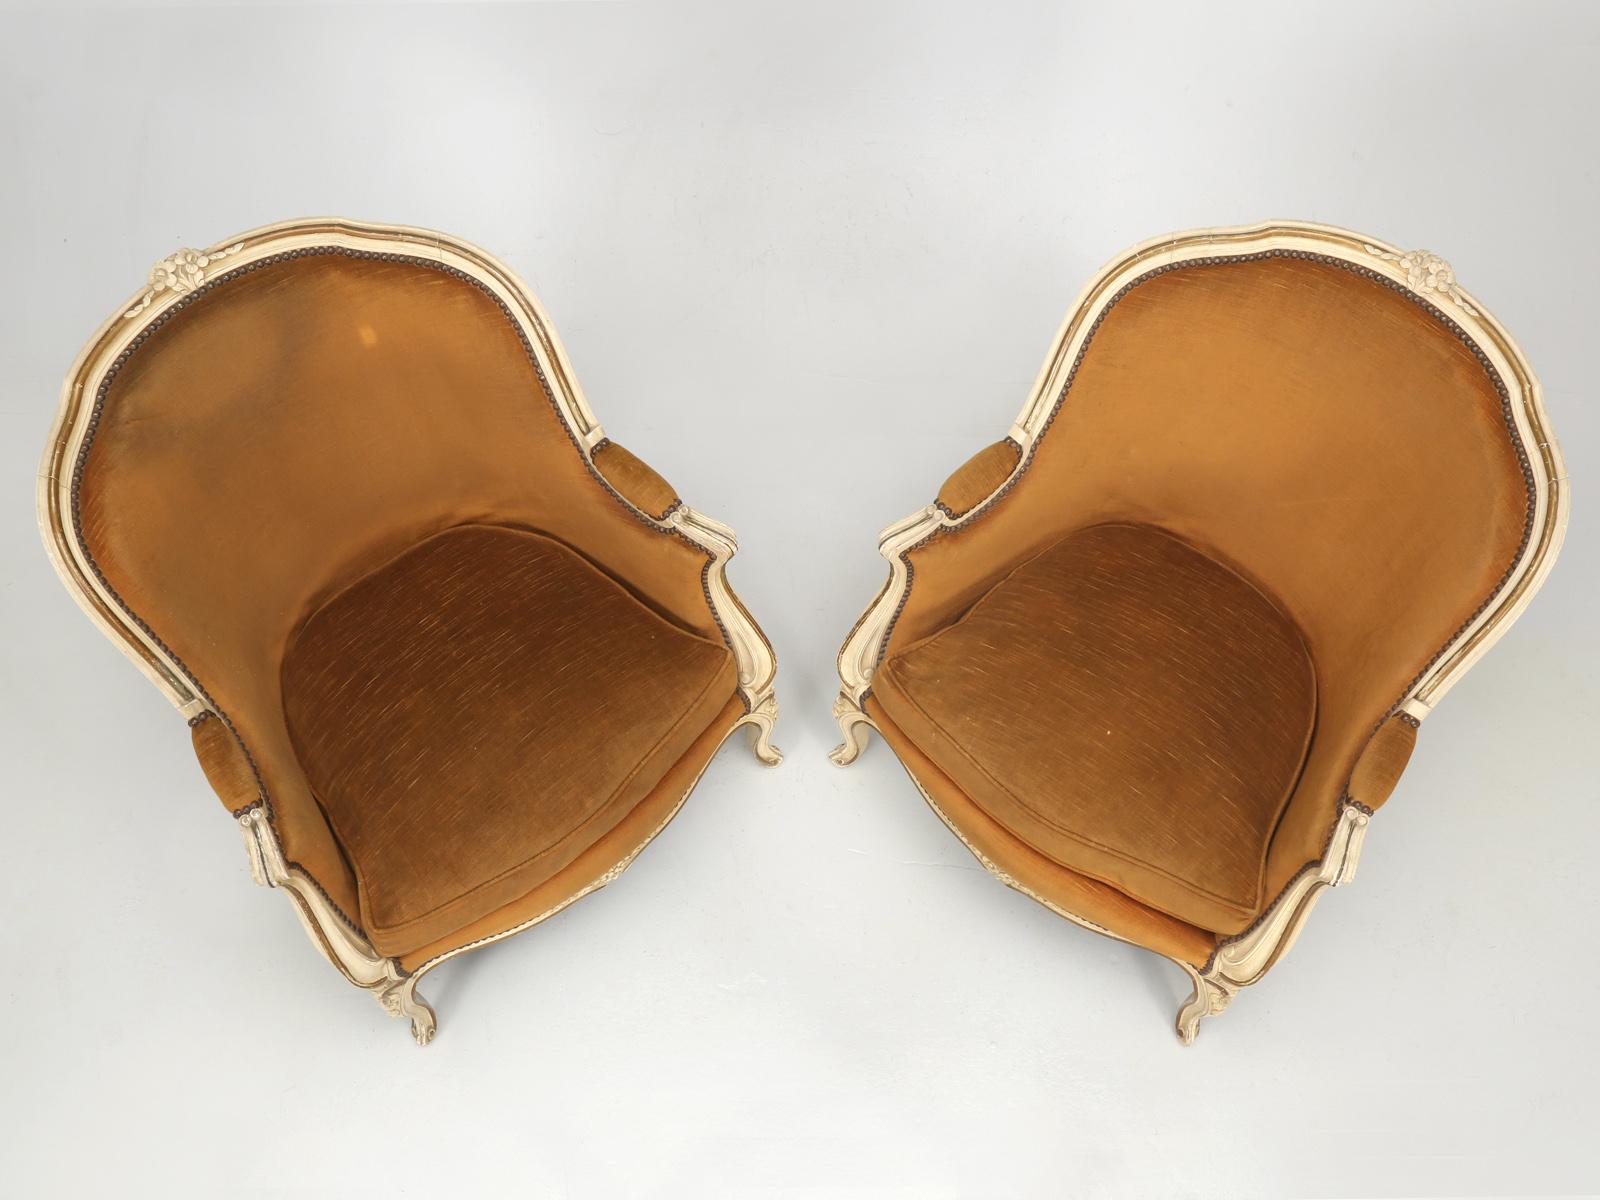 French vintage Louis XV style pair of Bergère chairs in their original paint and we believe the velvet fabric may also be original. We are also listing a third identical single Bergère chair on 1stdibs. This pair of vintage Louis XV style Bergère